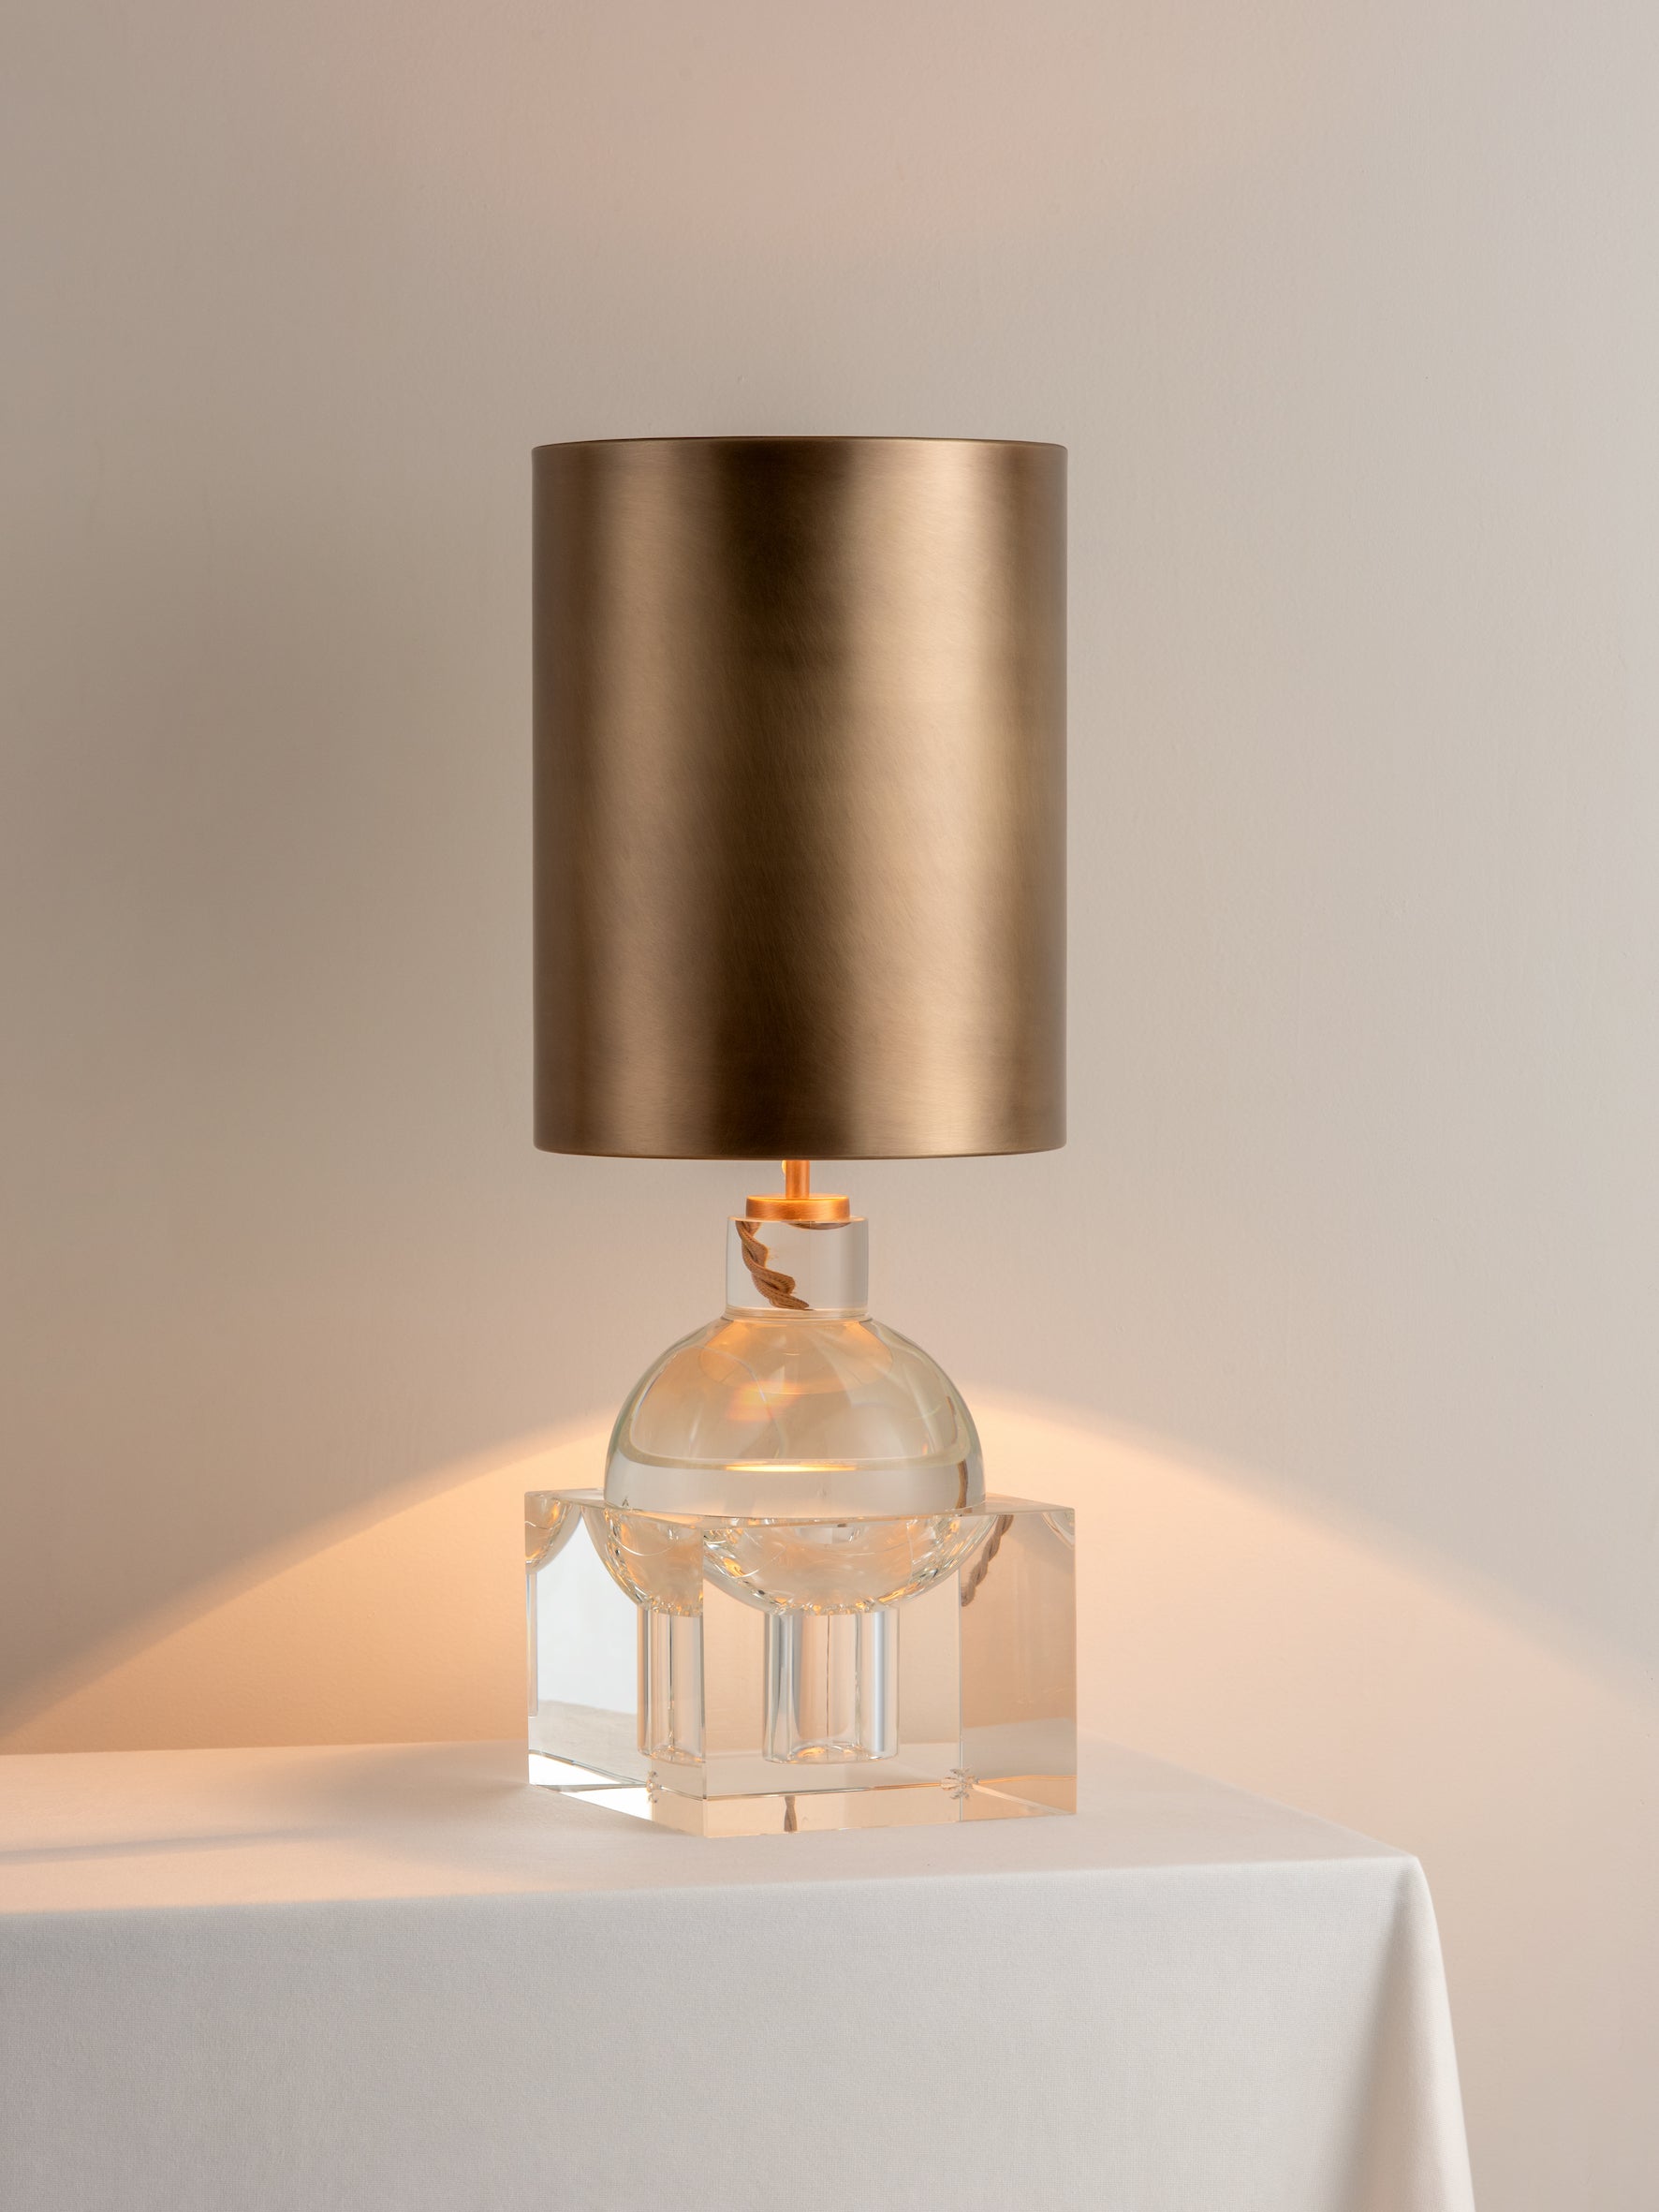 Editions crystal lamp with + aged brass shade | Table Lamp | Lights & Lamps | UK | Modern Affordable Designer Lighting